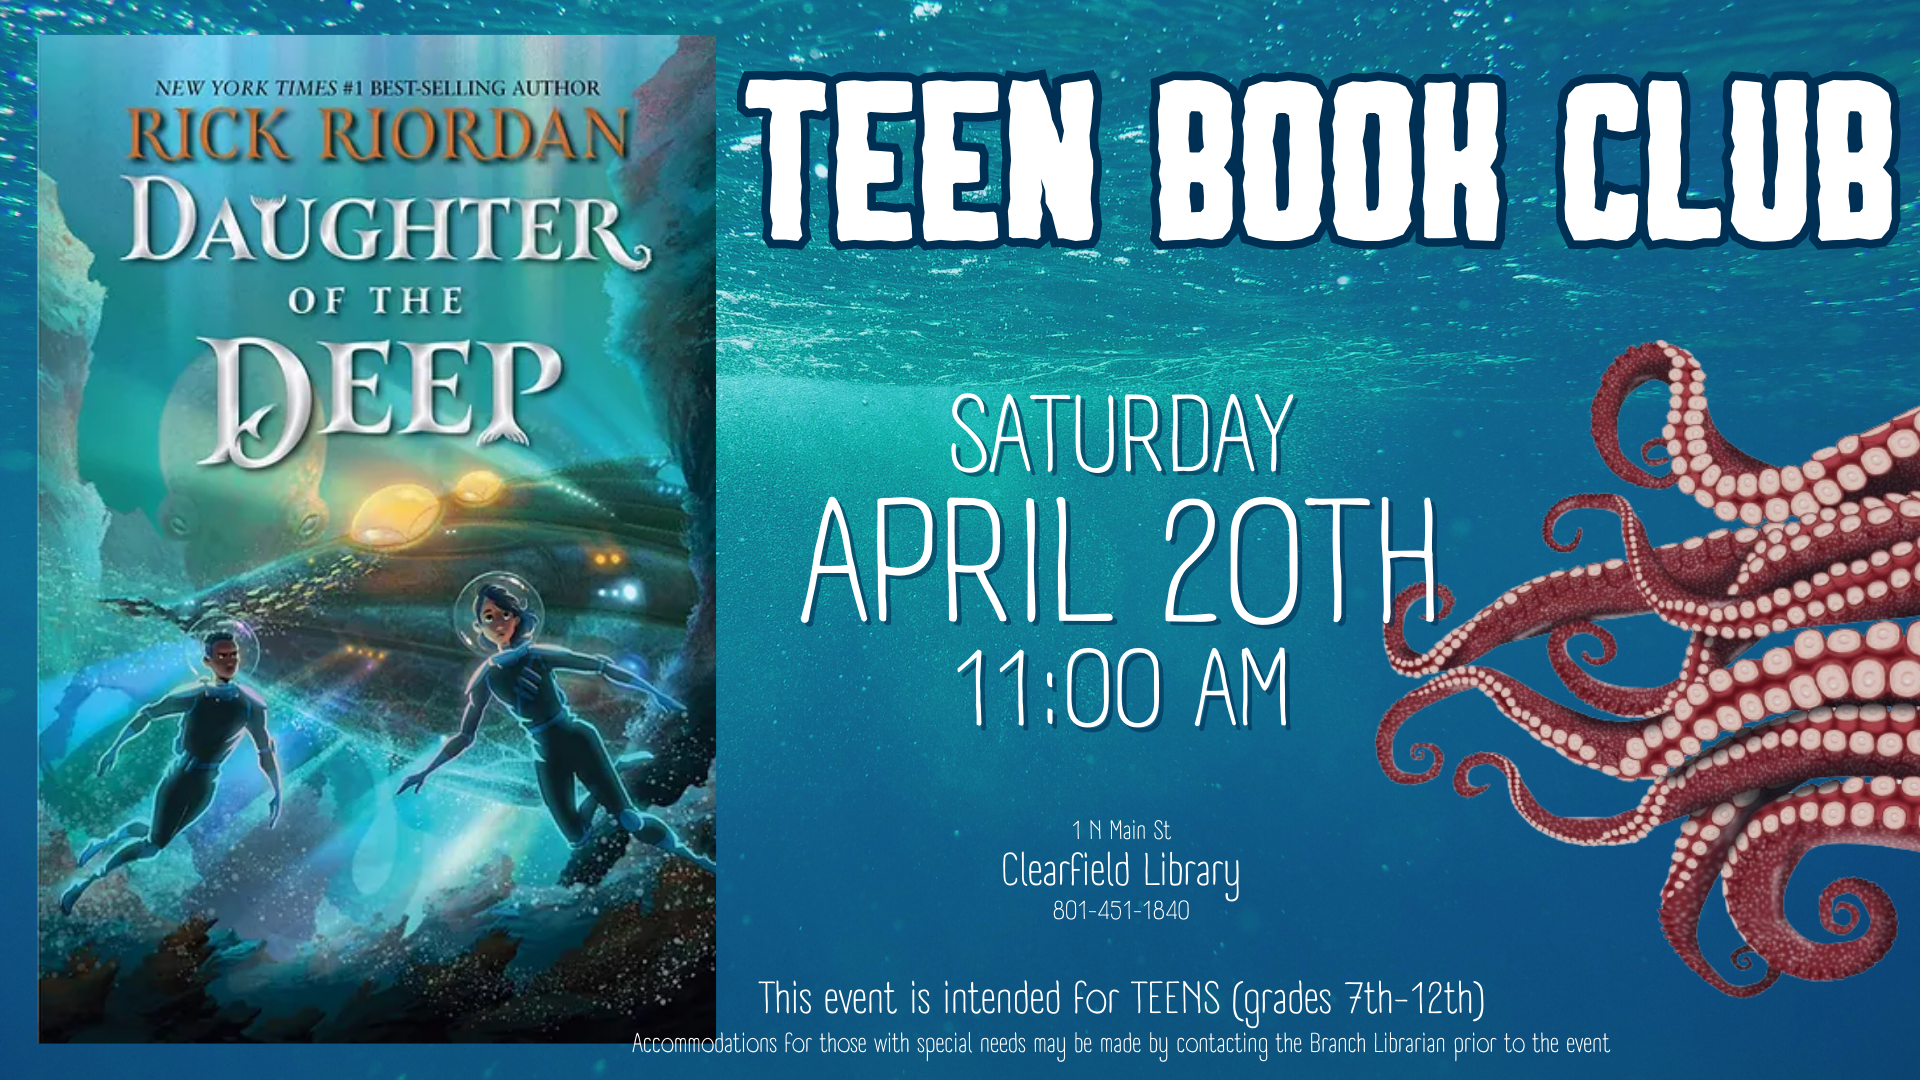 Image of the book "Daughter of the Deep" by Rick Riordan. Text reads: Teen Book Club. Saturday March 9th 11 am. Clearfield Library 1 N Main St 801-451-1840. This event is intended for TEENS (grades 7th-12th) Accommodations for those with special needs may be made by contacting the Branch Librarian prior to the event